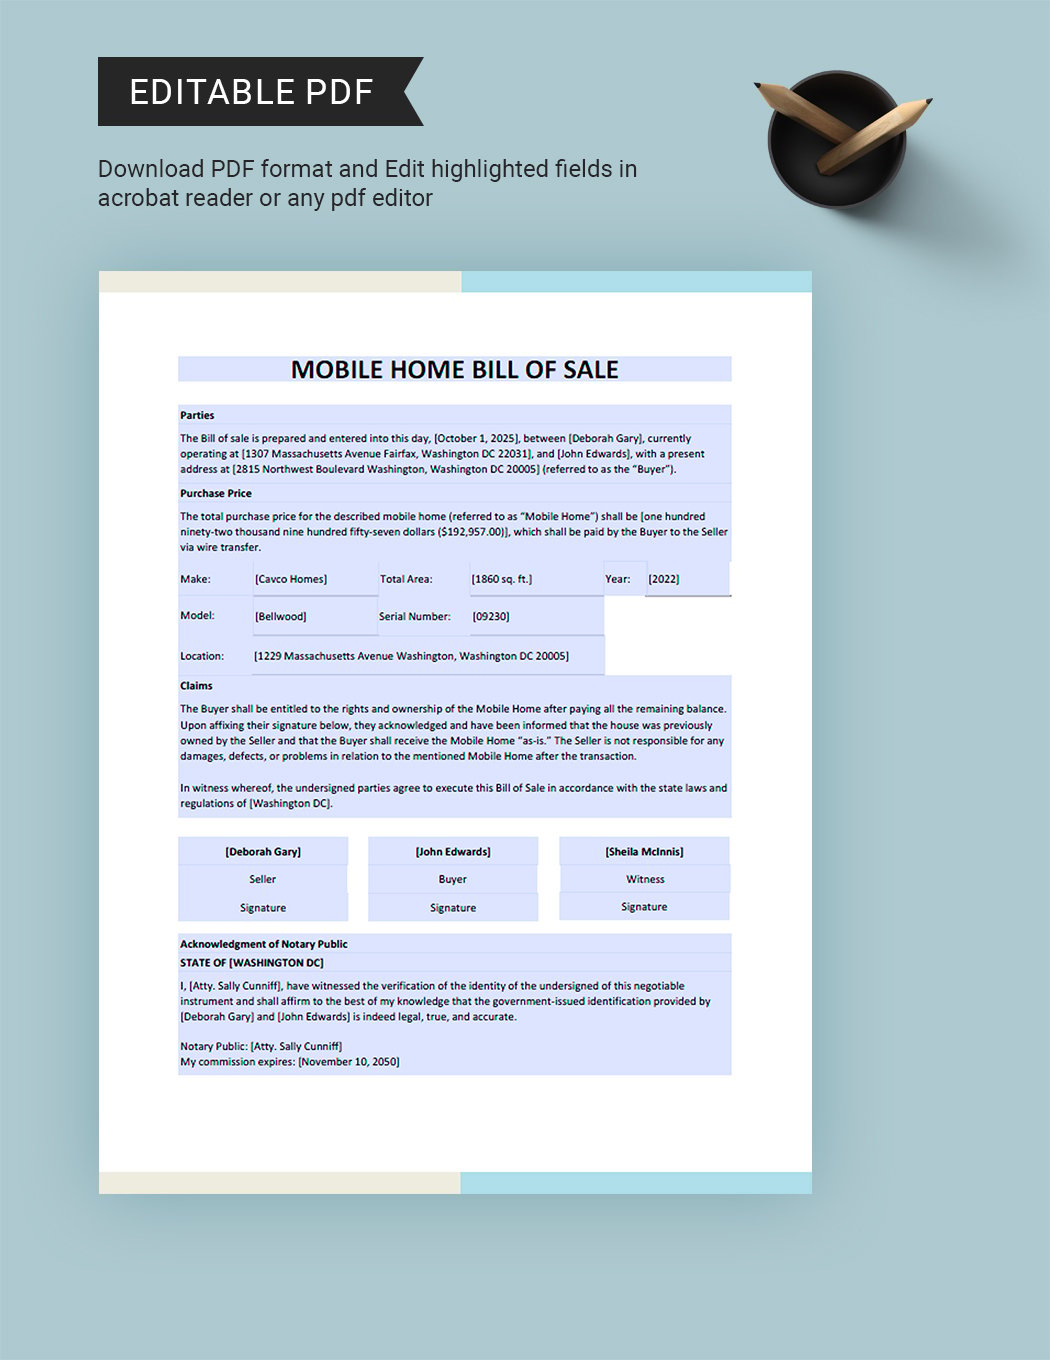 Mobile Home Bill of Sale Template